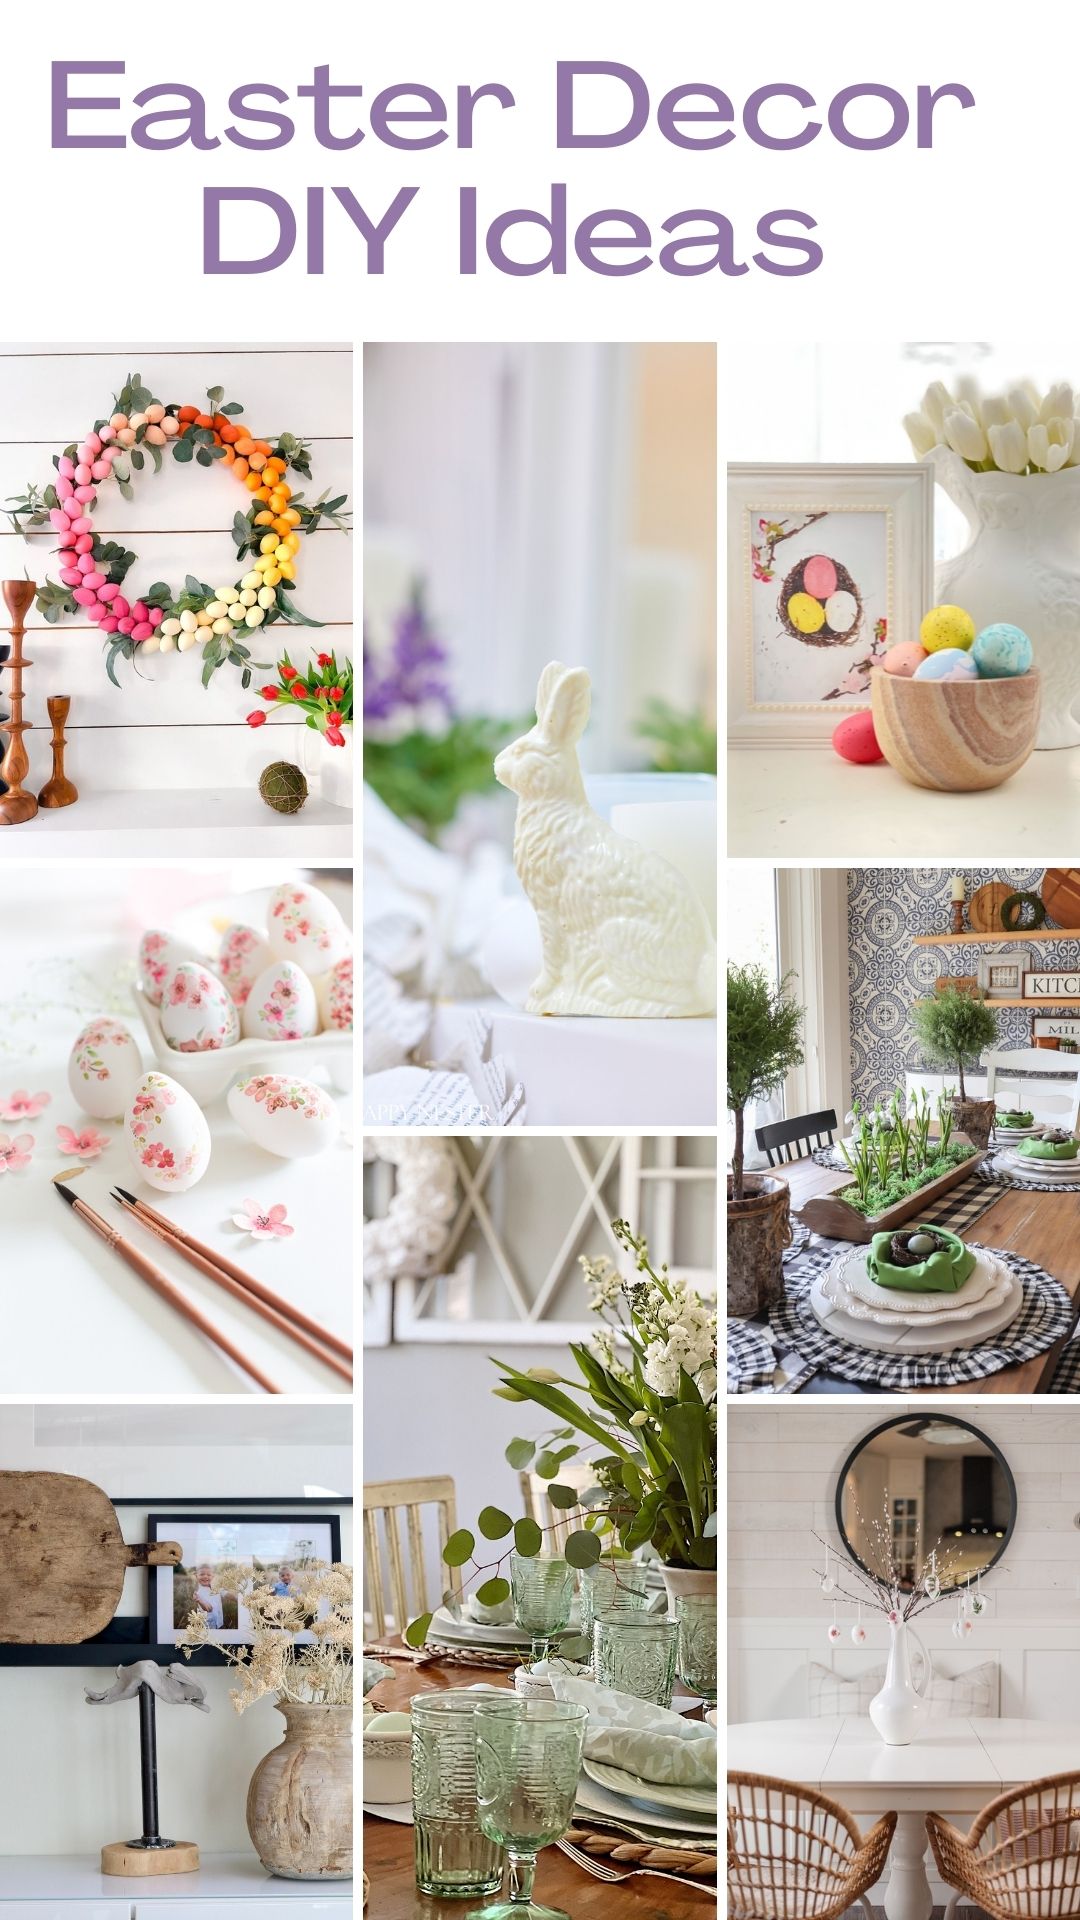 I created a table with Easter decor using decorative napkins, small egg pots, and a beautiful floral arrangement.